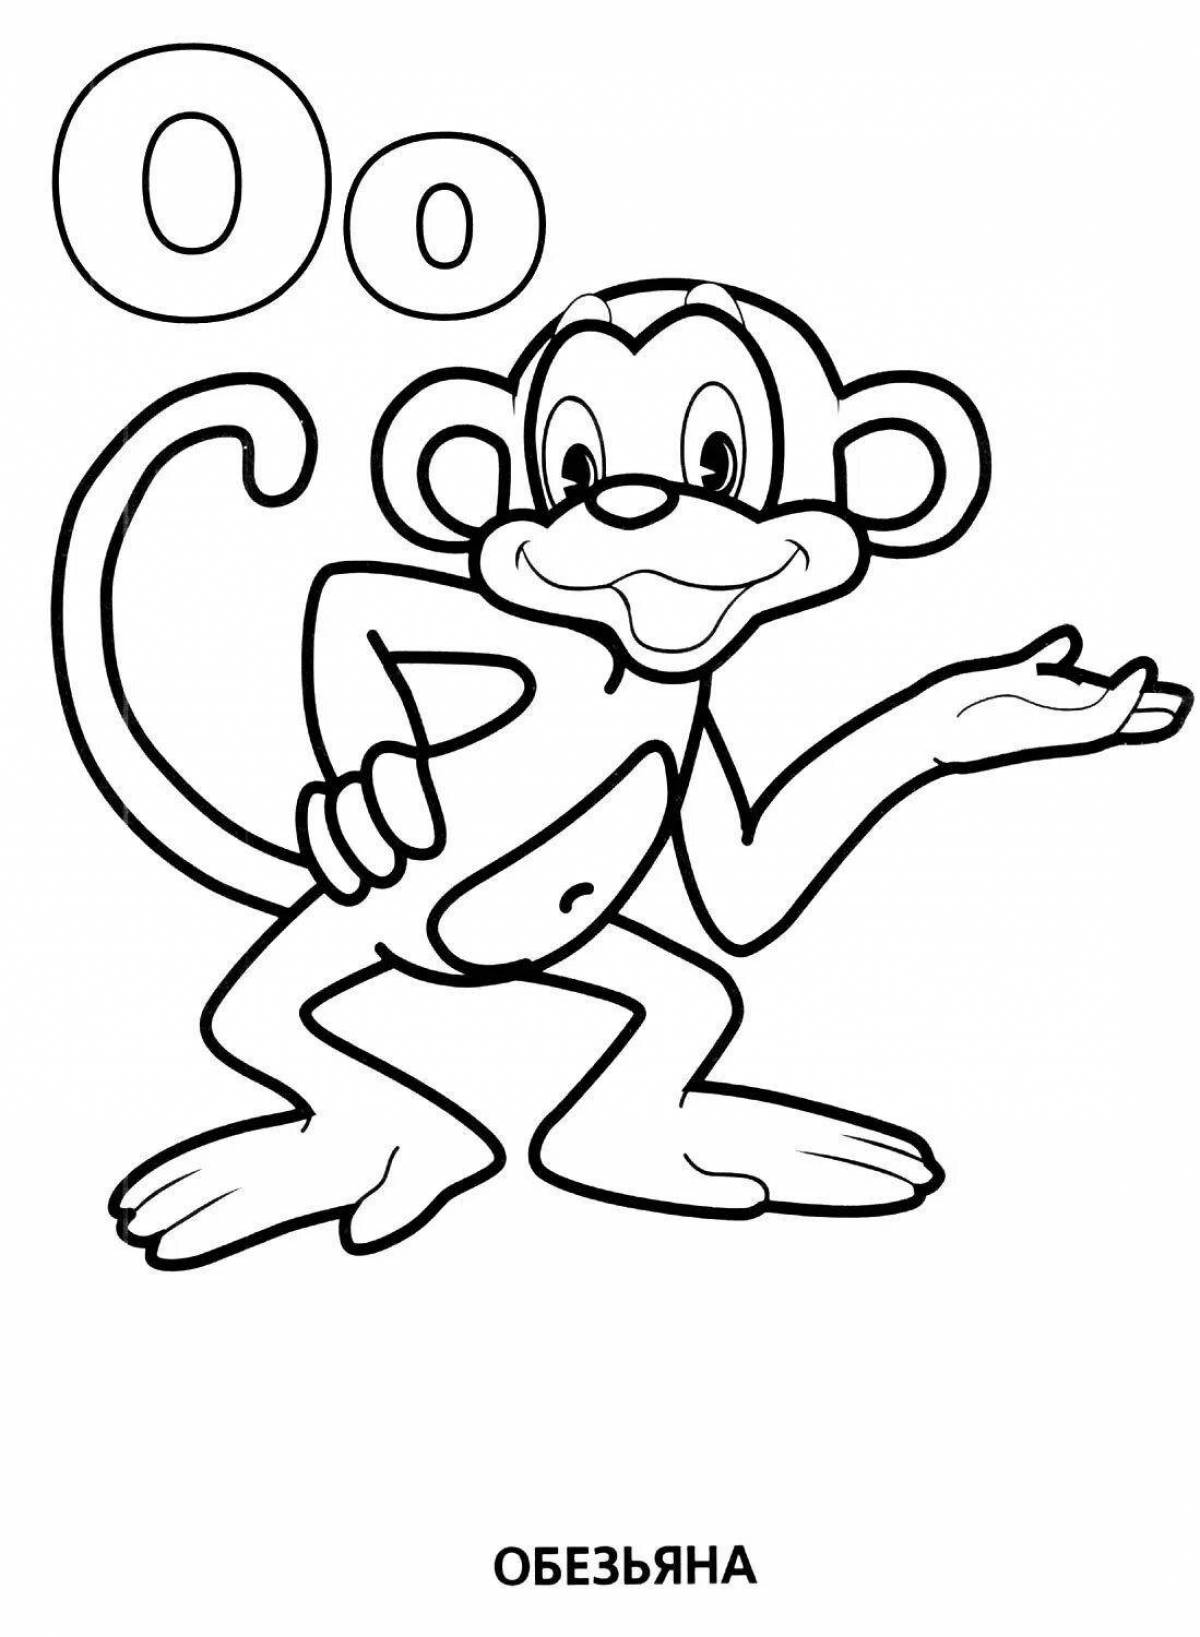 Cute monkey and glasses coloring book